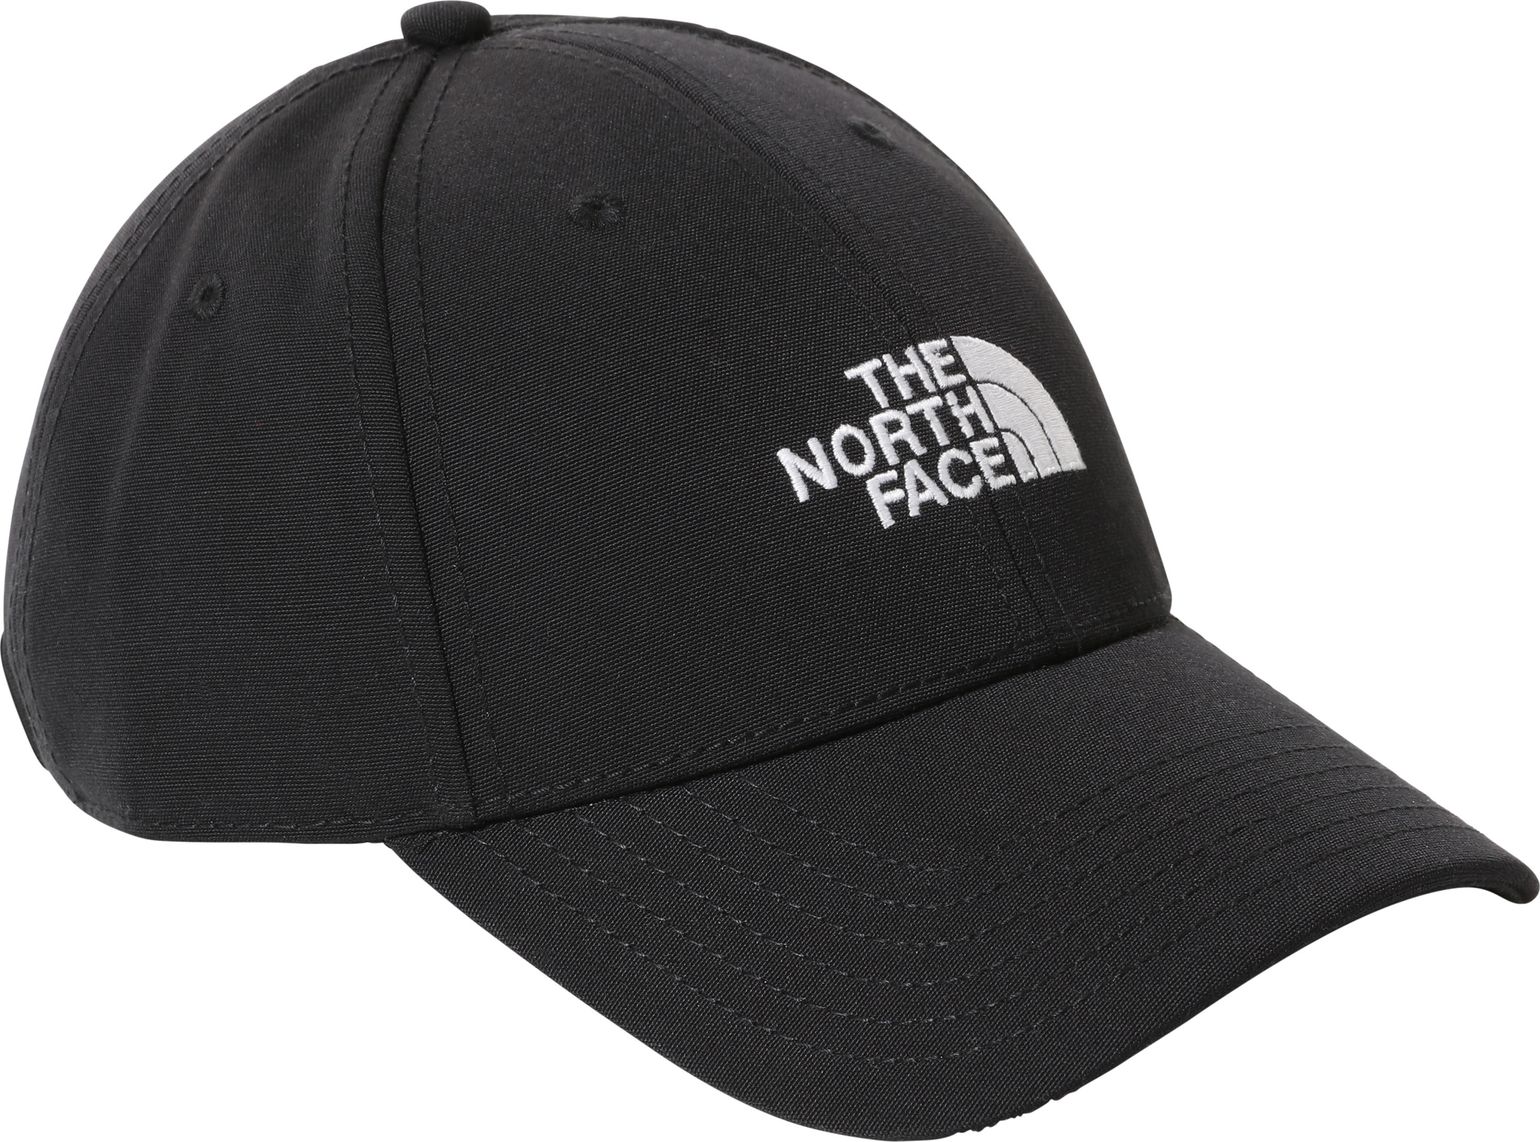 Recycled '66 Classic Hat TNF Black-TNF White